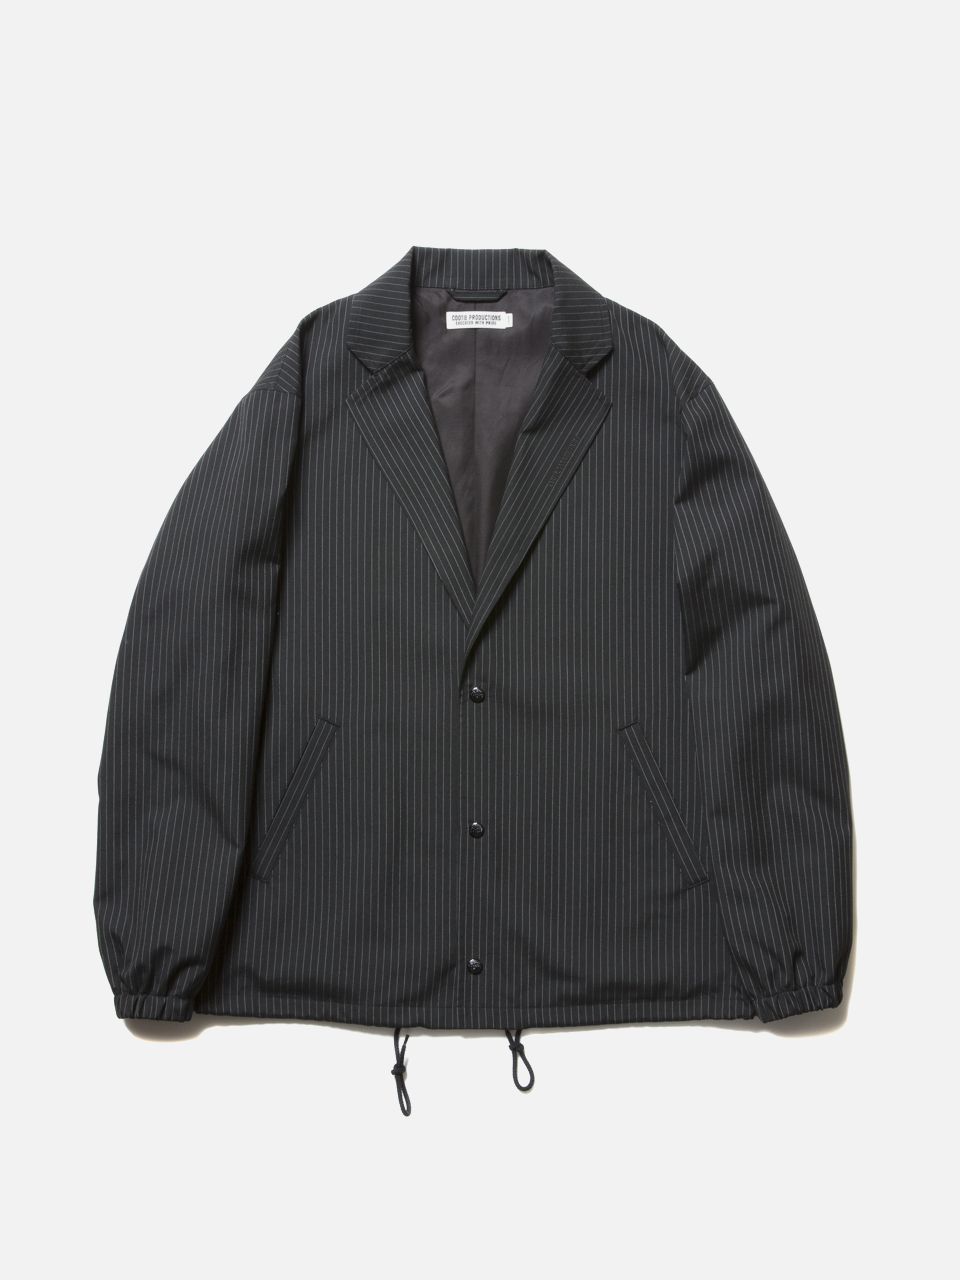 COOTIE クーティ 通販 19SS T/R Lapel Coach Jacket